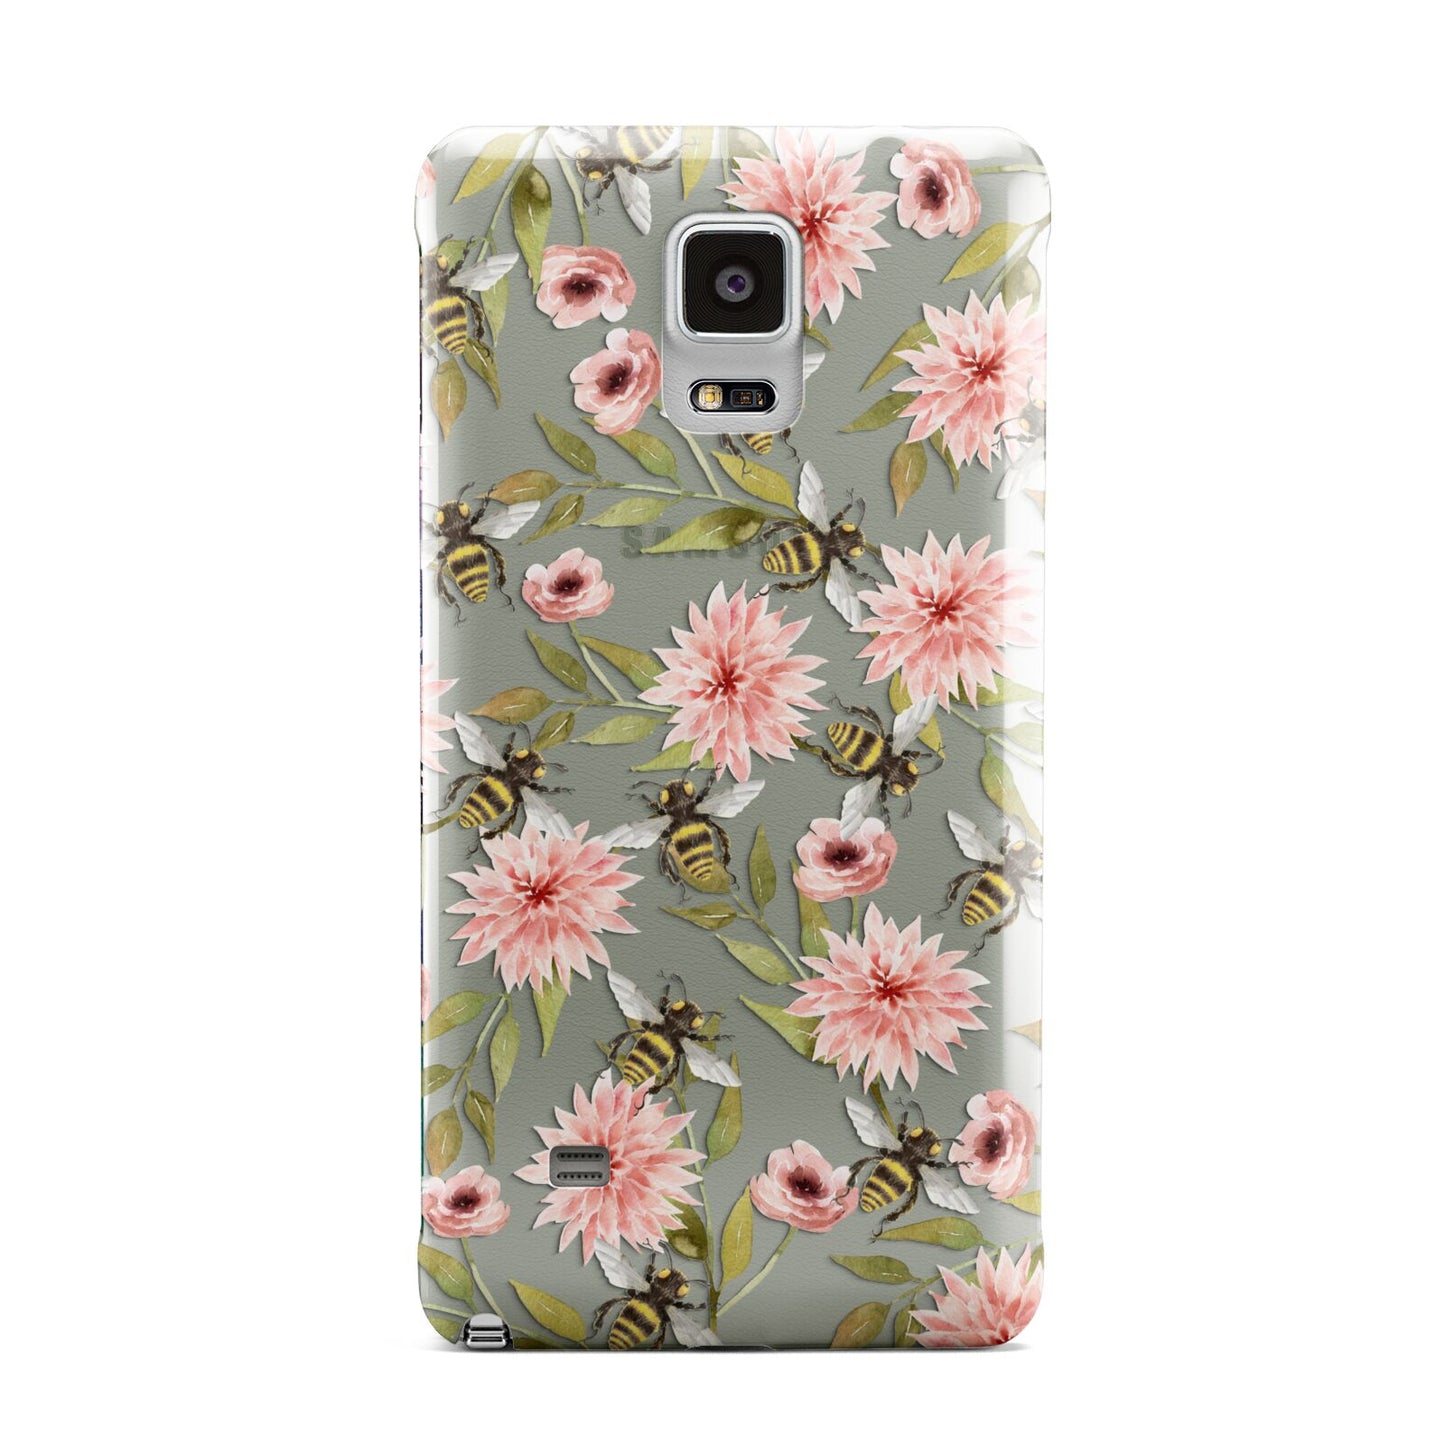 Pink Flowers and Bees Samsung Galaxy Note 4 Case